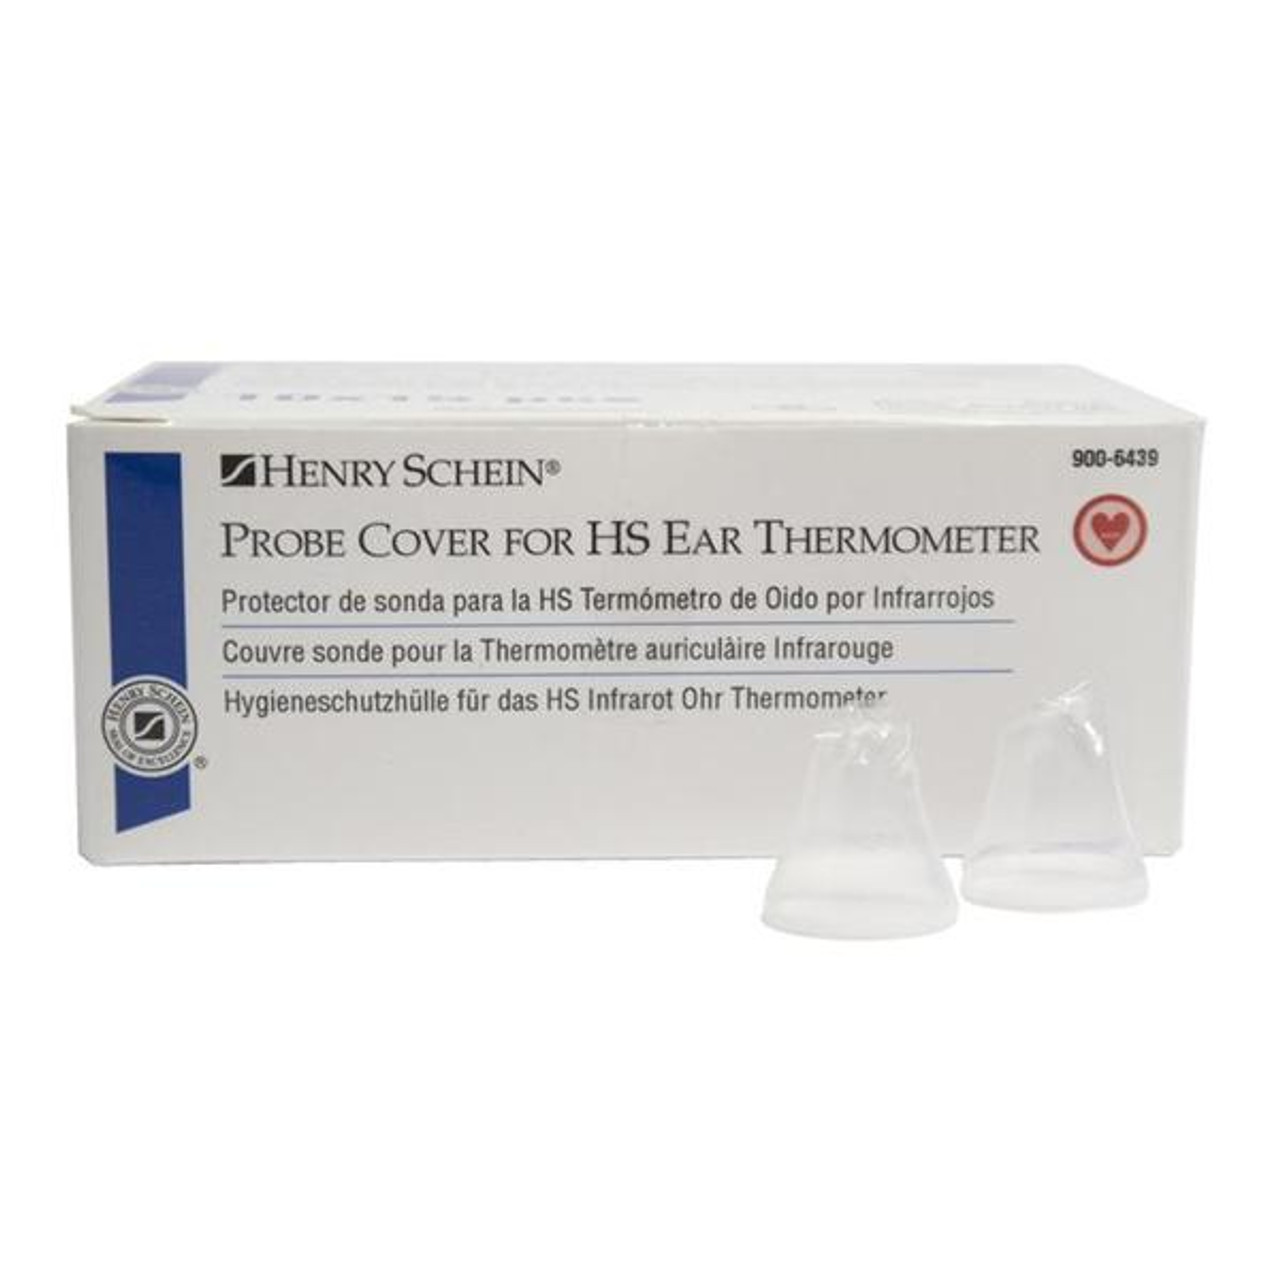 Henry Schein Tympanic Digital Ear Thermometer w/ 15 Disposable Probe Covers  - DDP Medical Supply